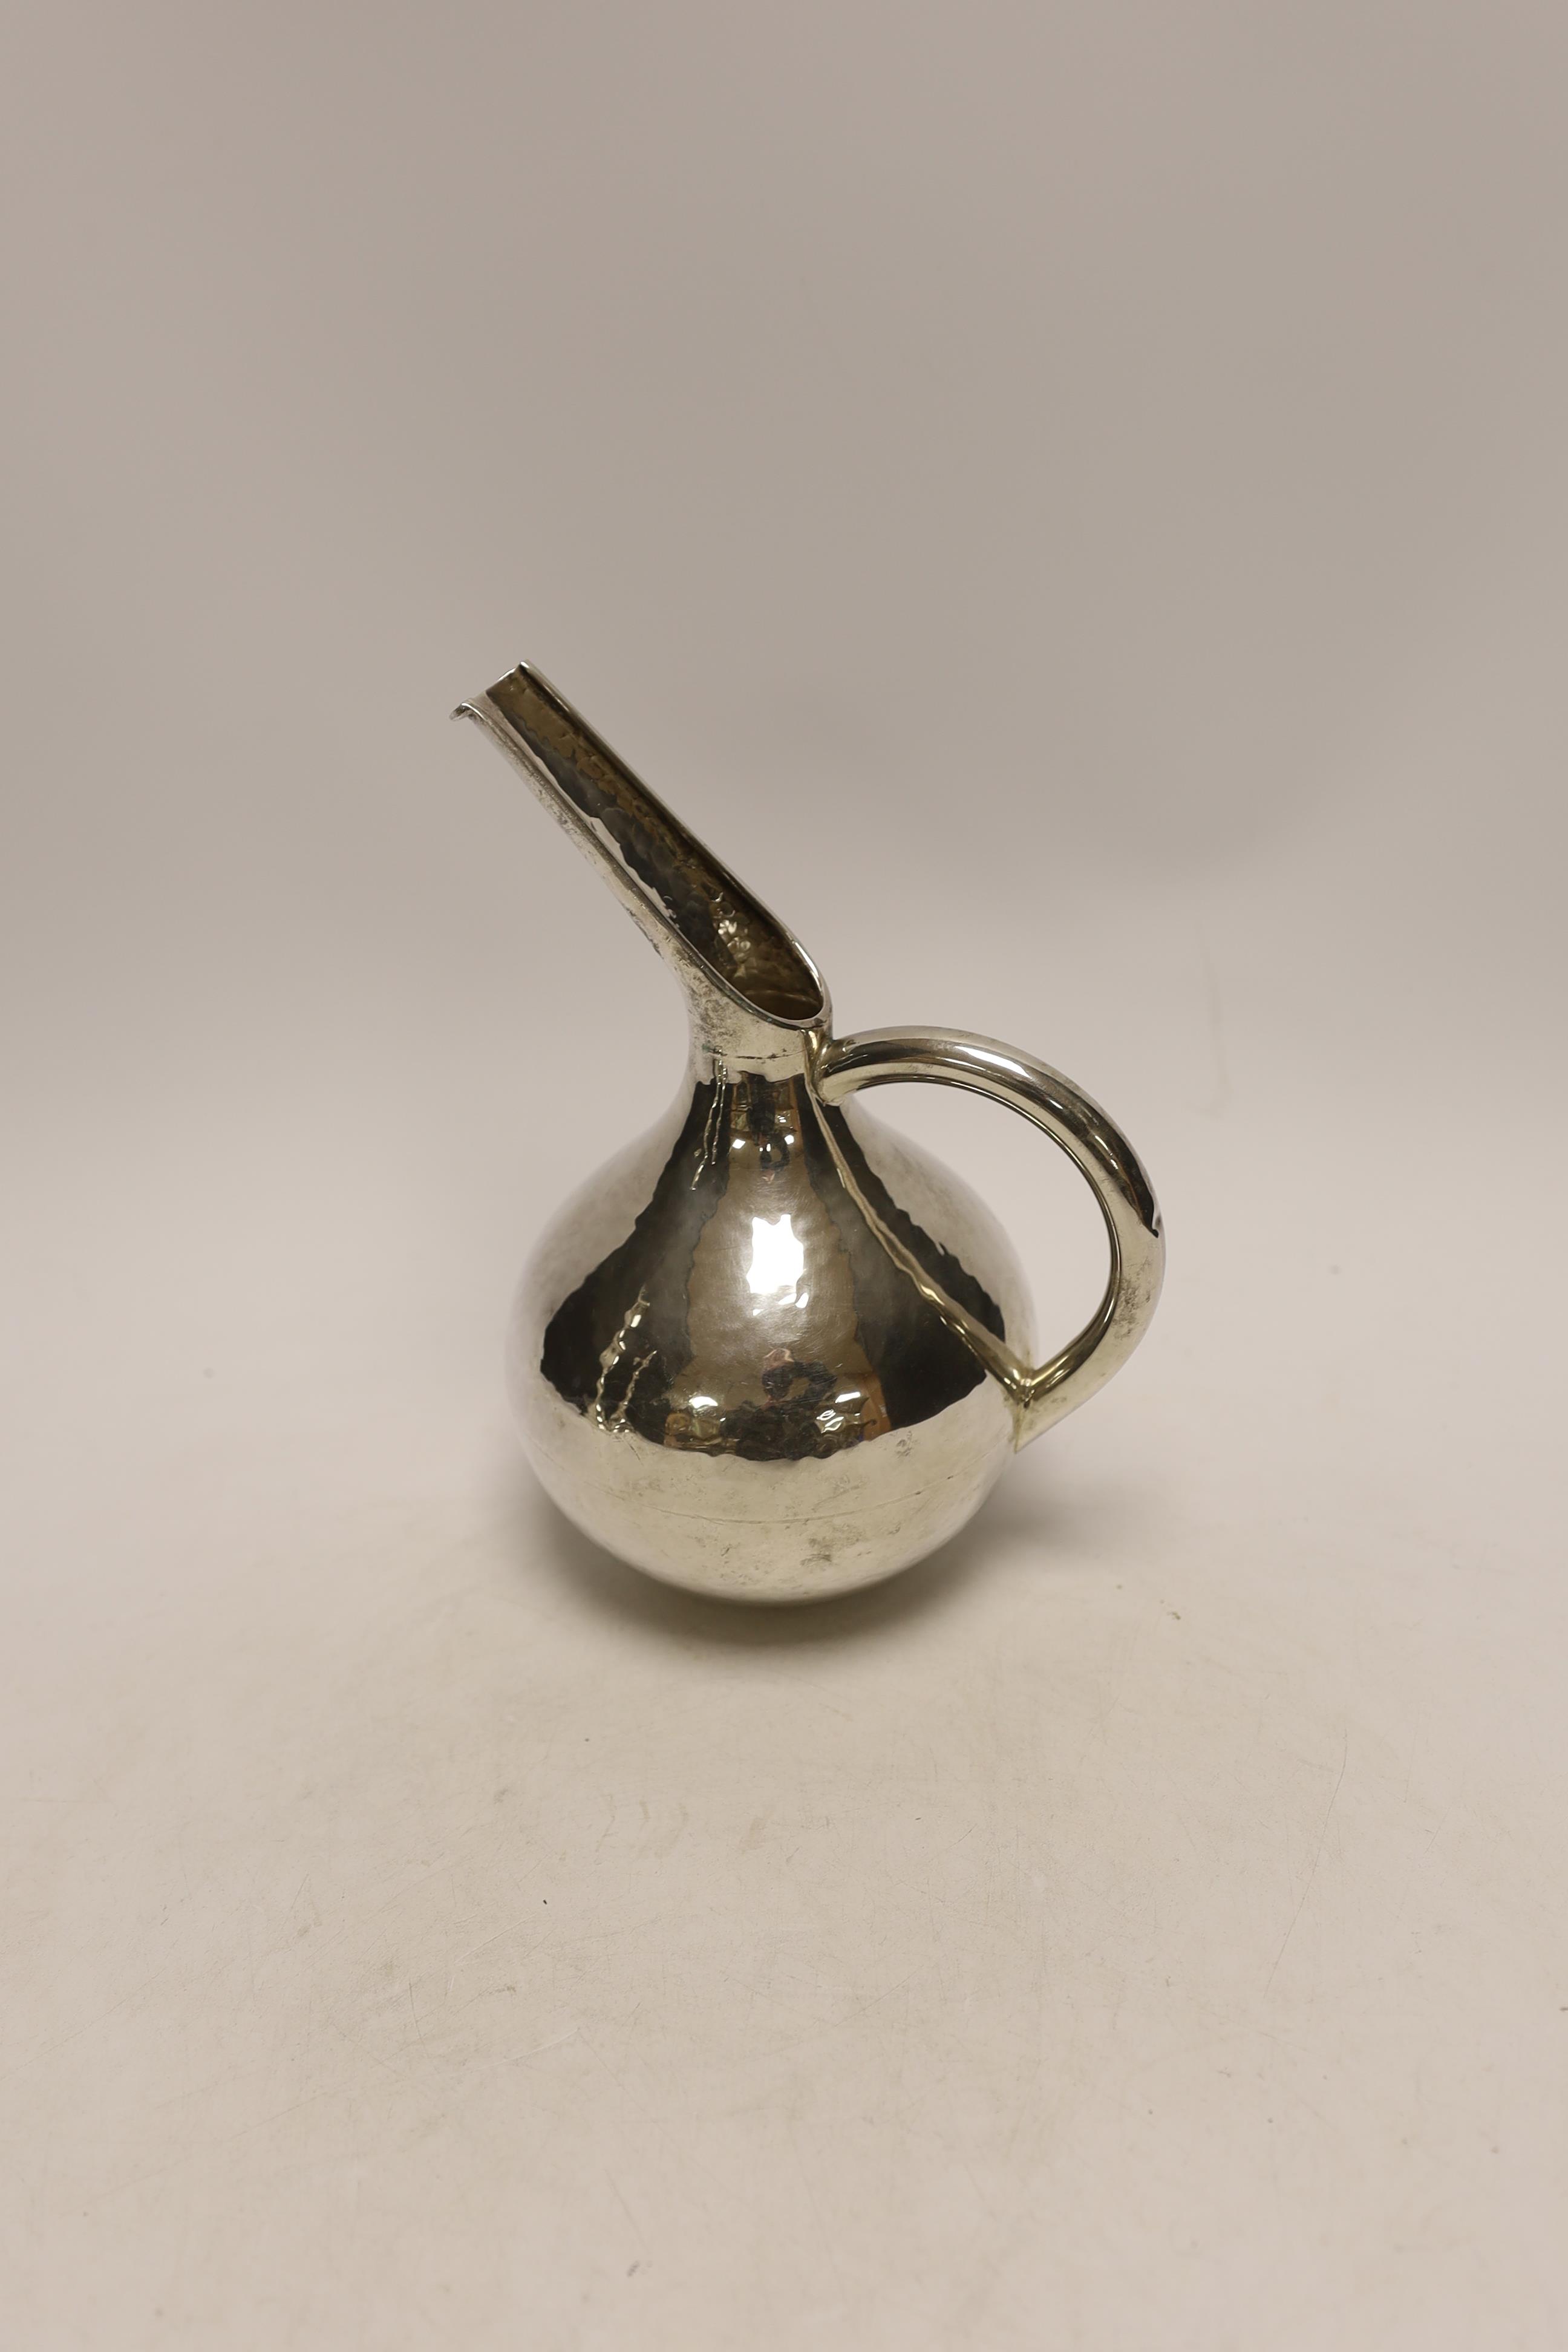 A Cypriot 925 milk pitcher, with elongated spout, height 20.3cm, 8.9oz.